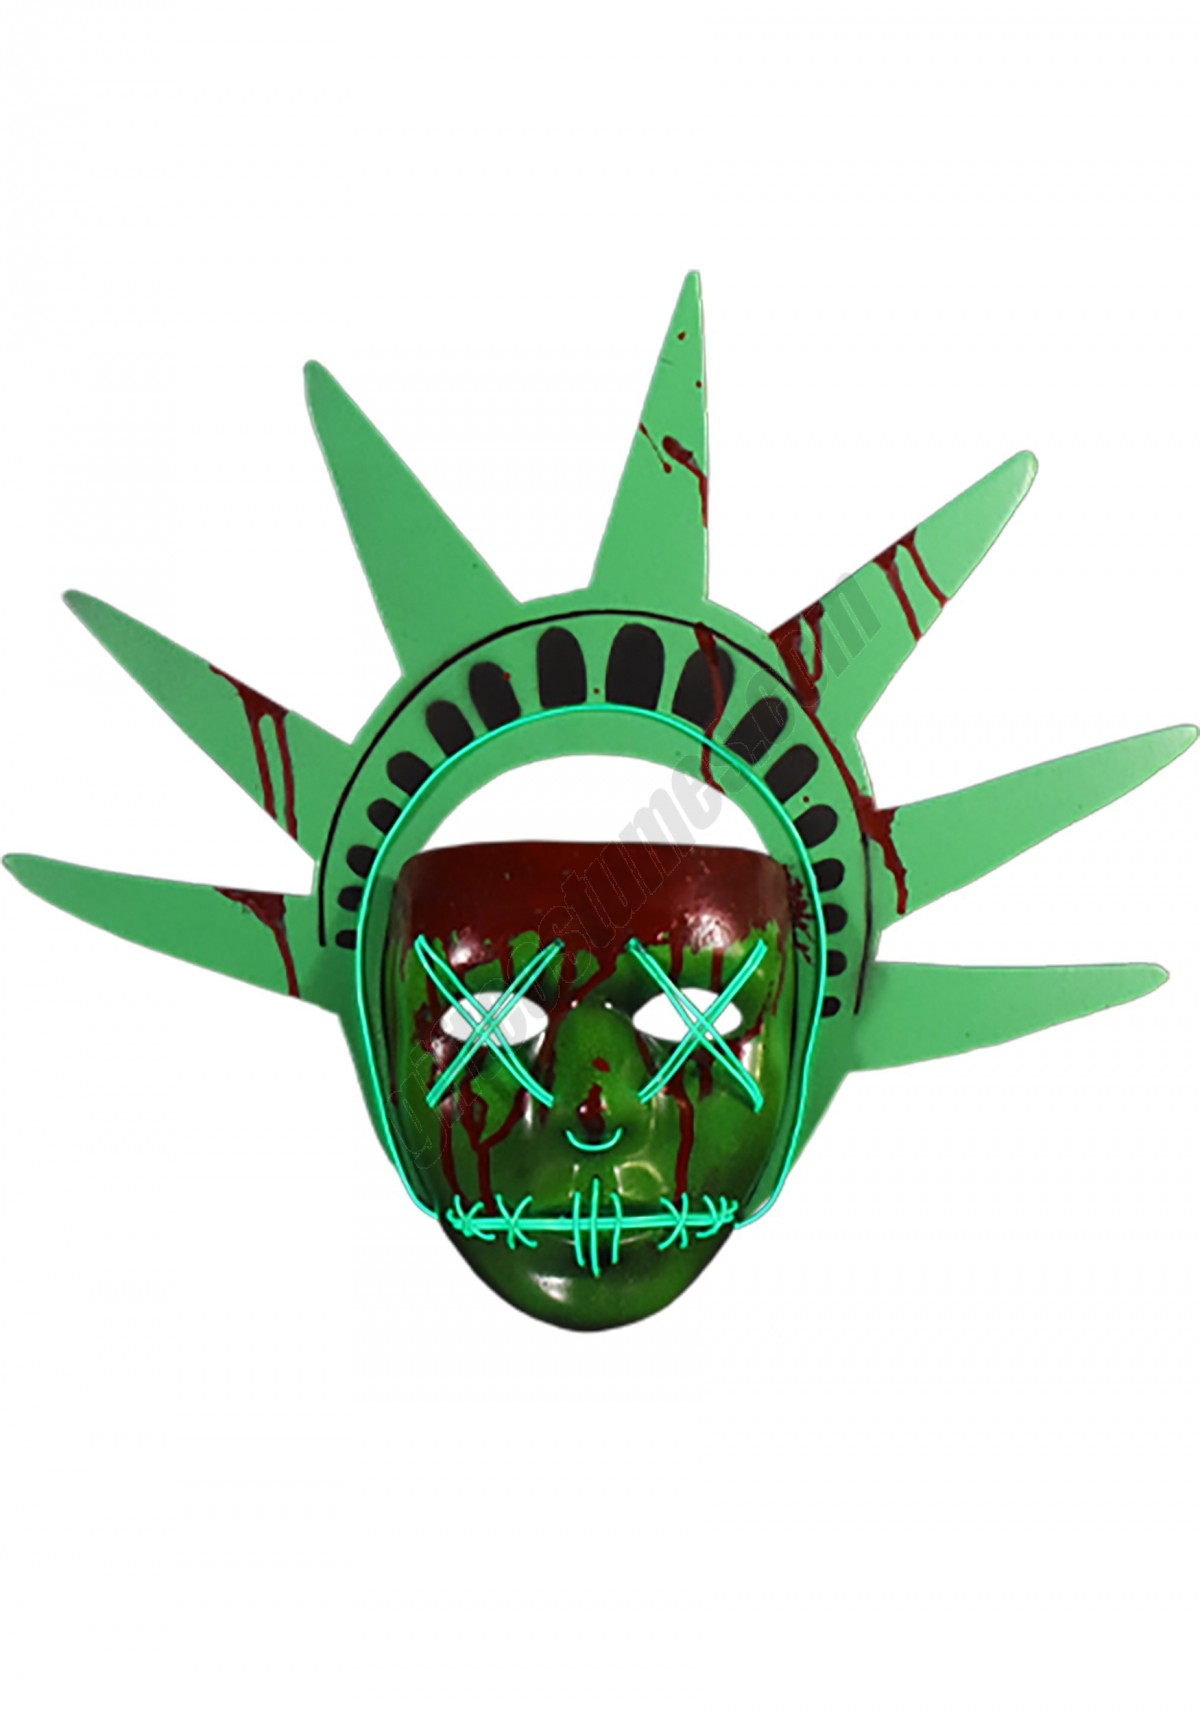 Lady Liberty Light Up Mask from The Purge Promotions - -0